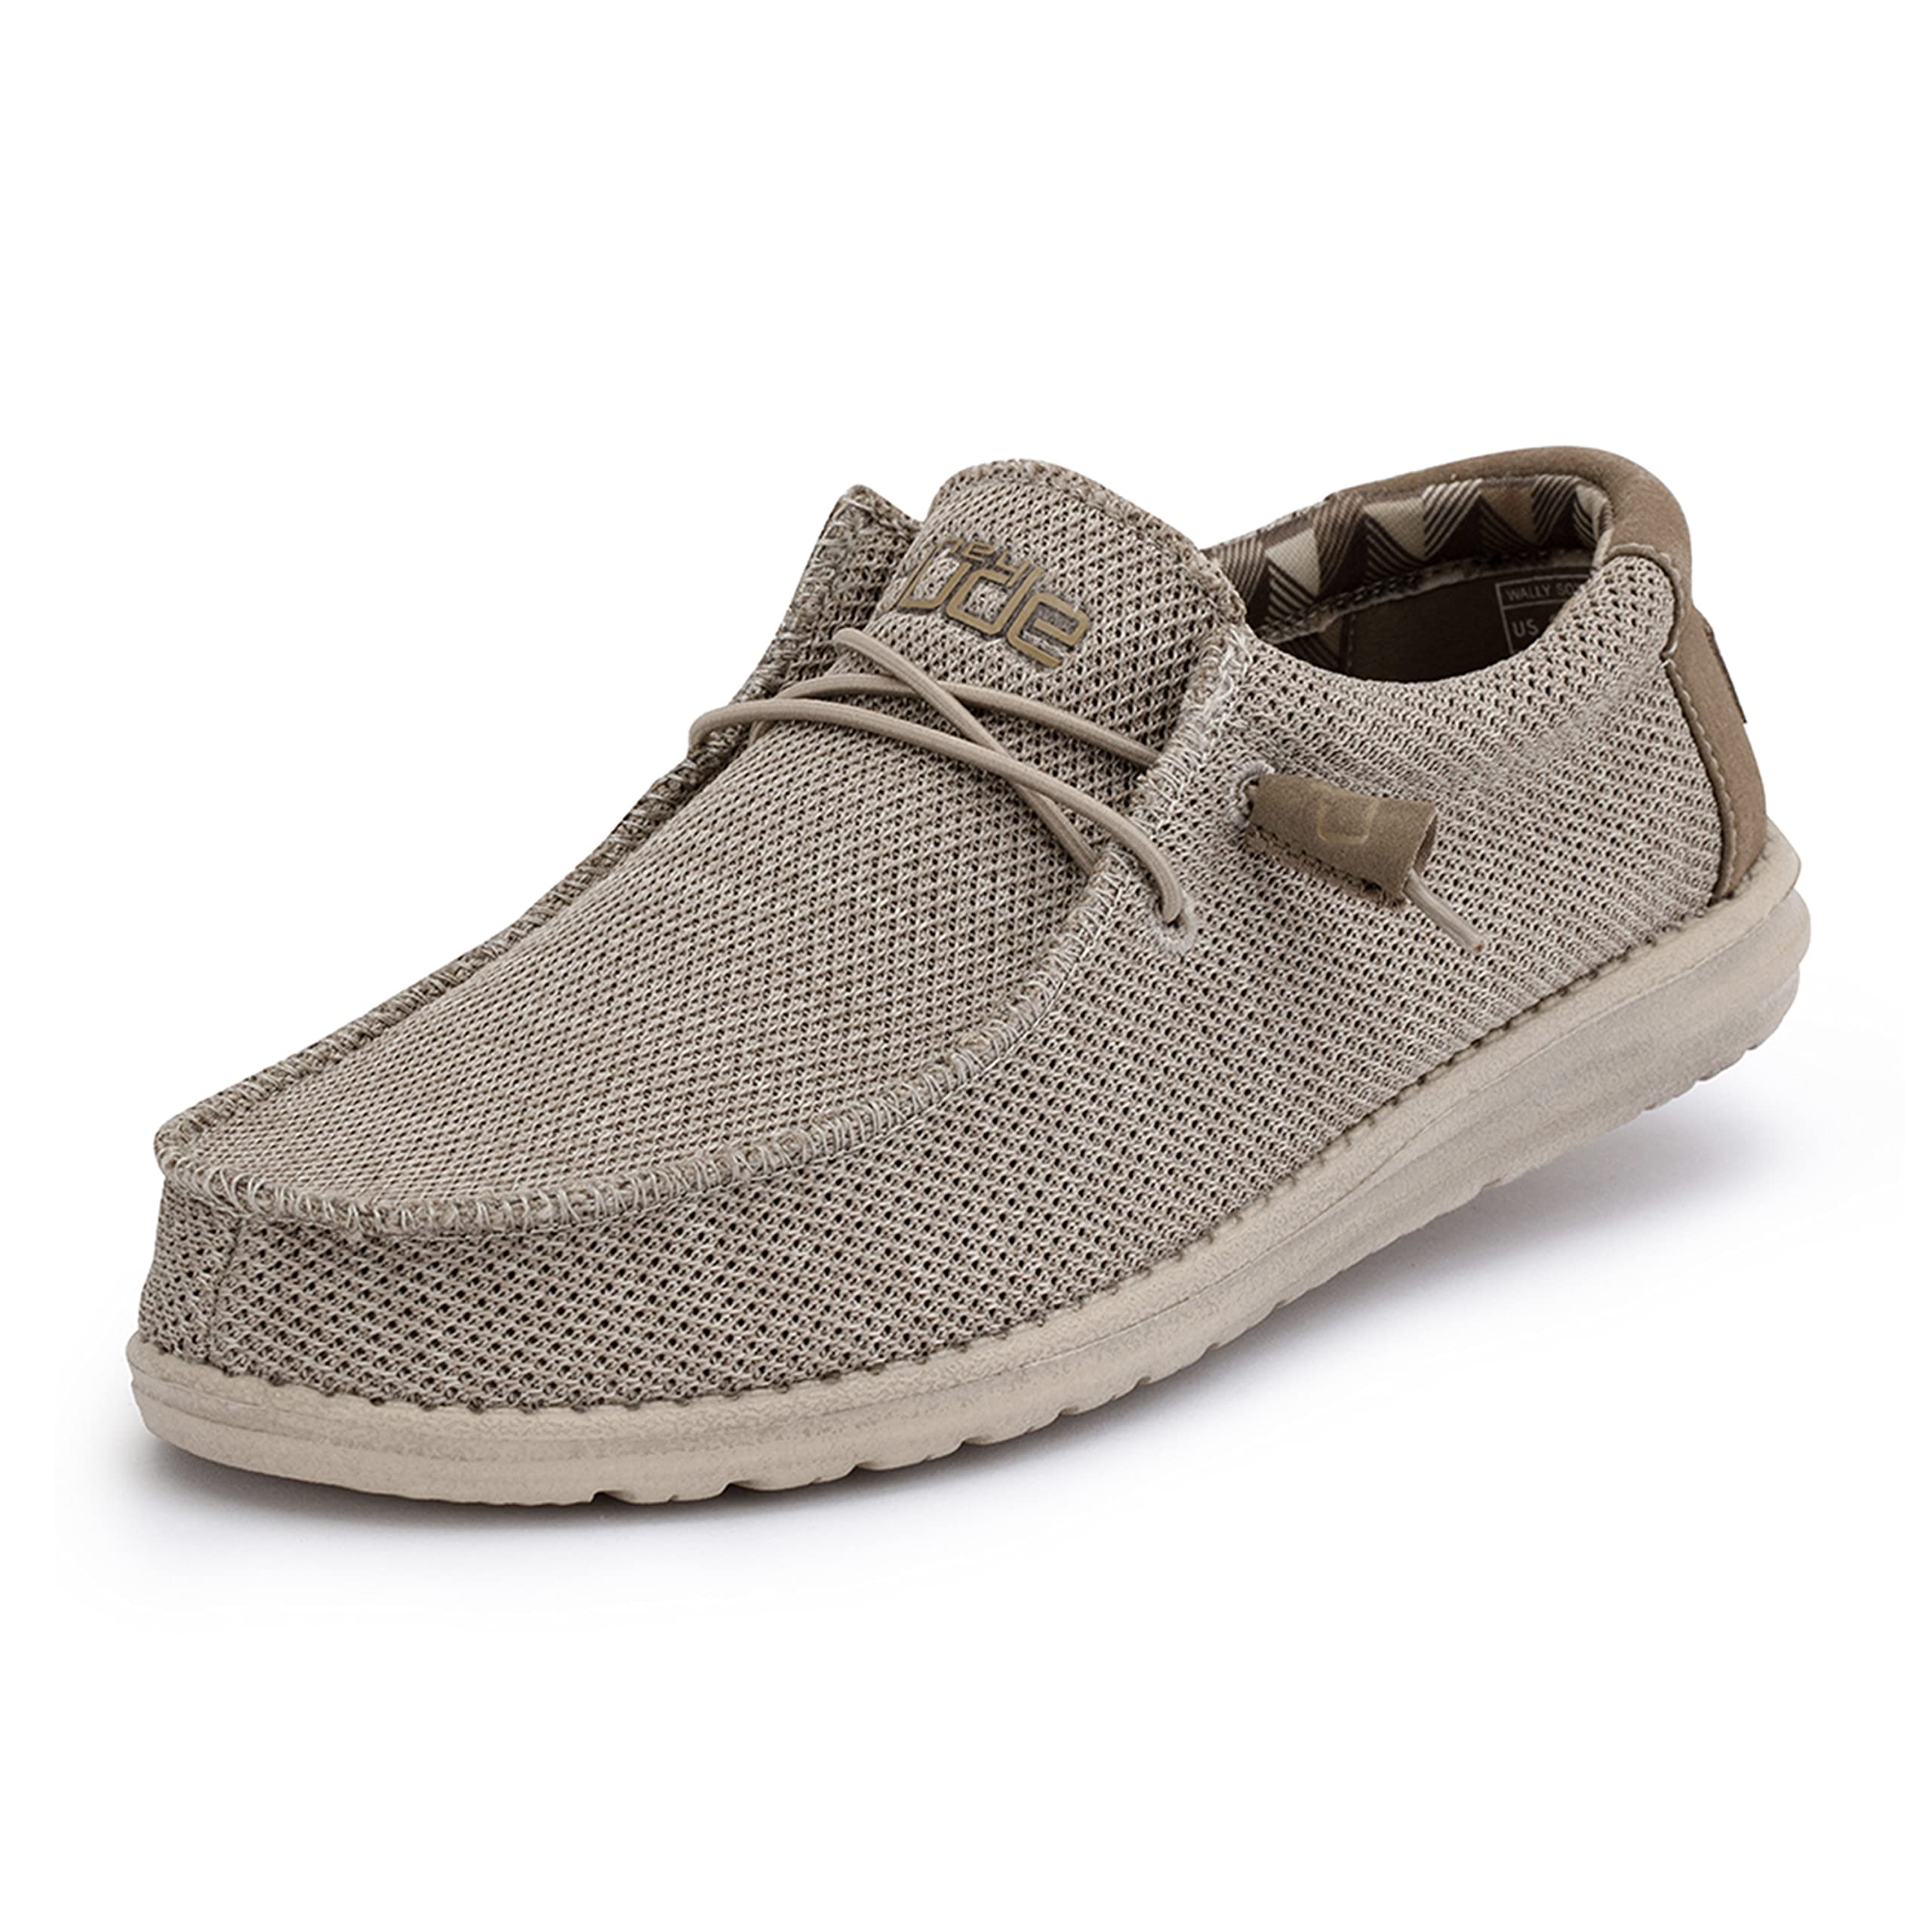 Hey Dude Men's Wally Sox | Men's Loafers | Men's Slip On Shoes | Comfortable & Light-Weight